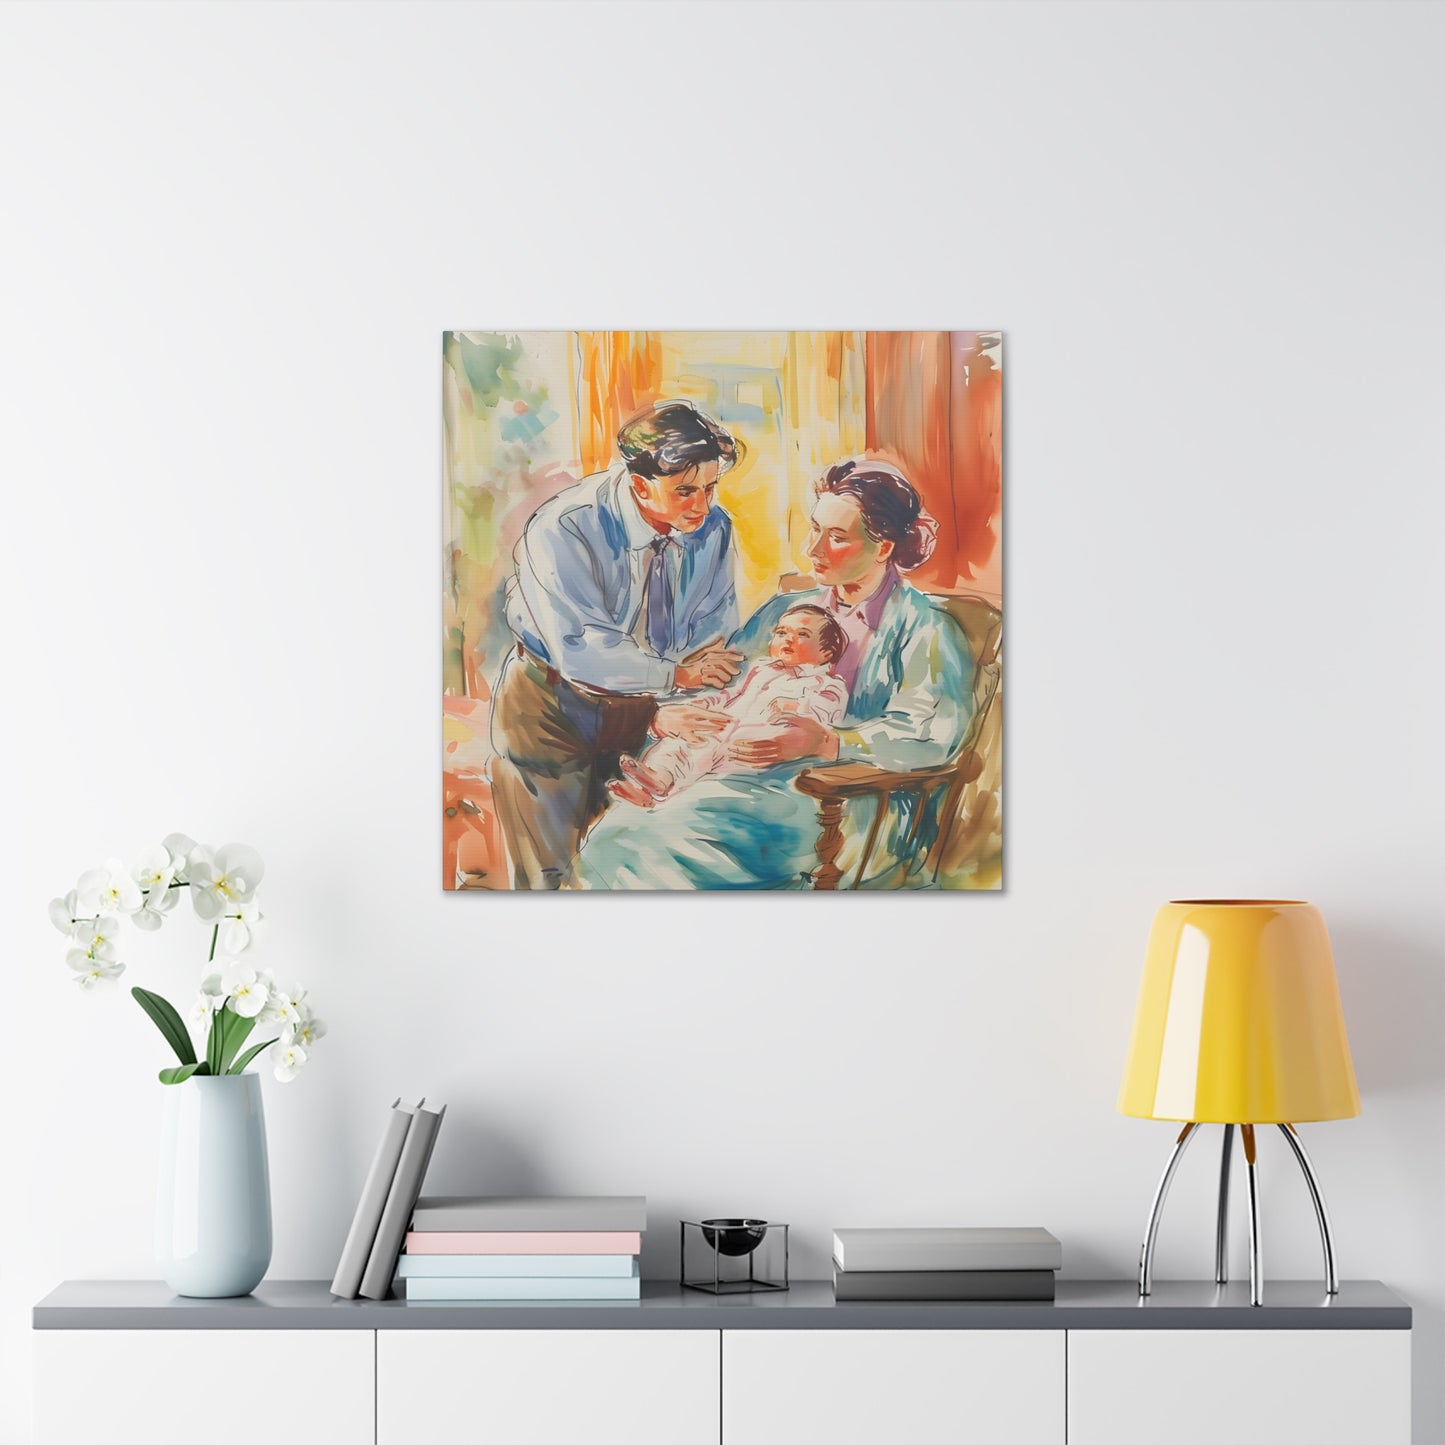 Eloise Seraphine. New Beginnings: Embracing Life's Gentle Unfolding. Exclusive Canvas Print